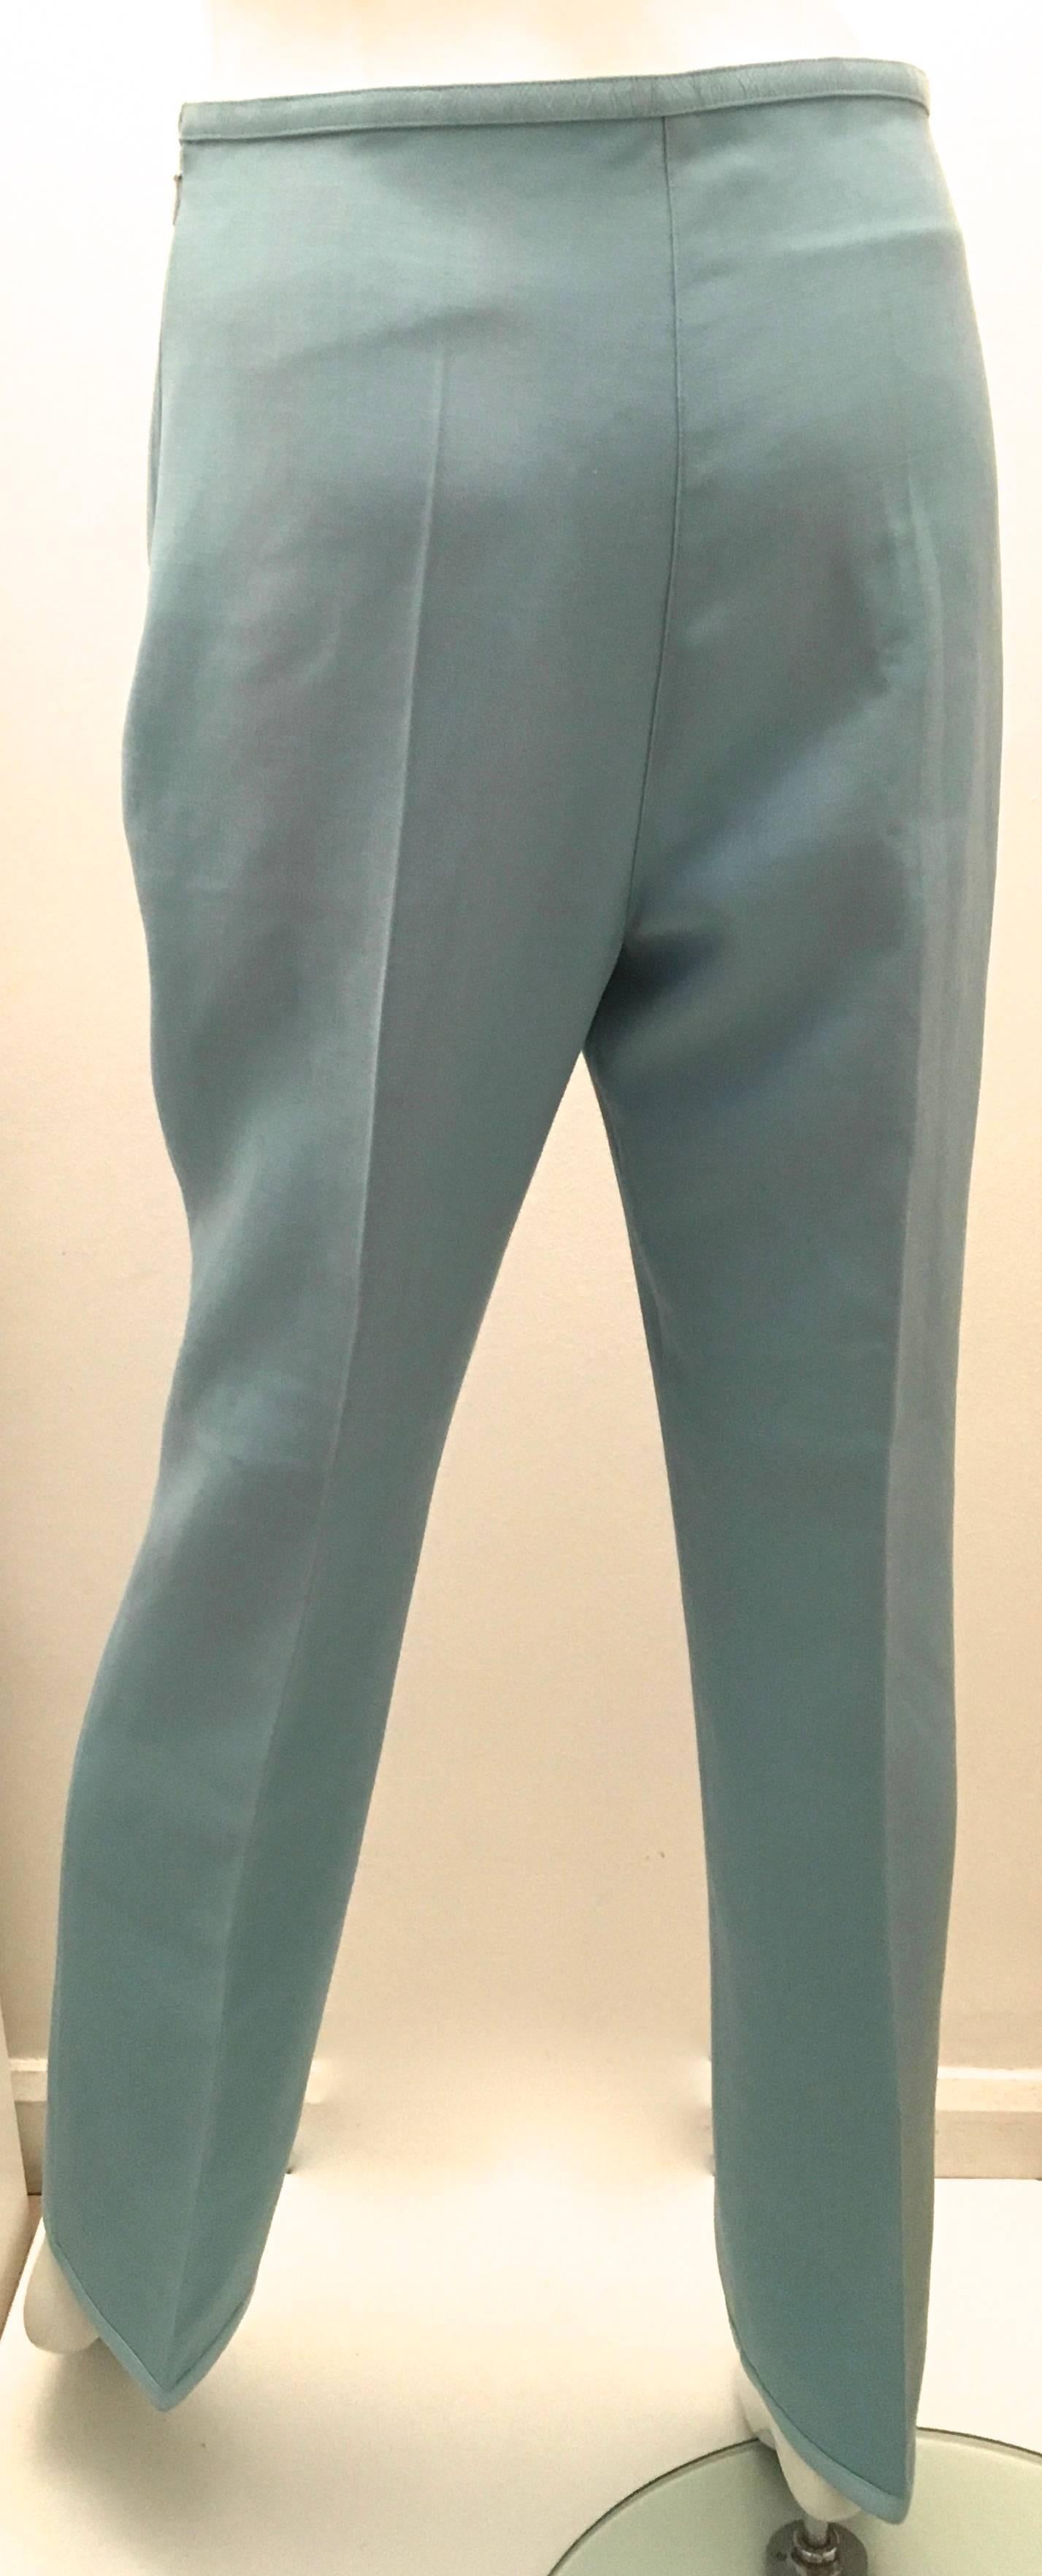 Courreges White Blue Wool with Patent Leather Trim Pants  In Excellent Condition For Sale In Boca Raton, FL